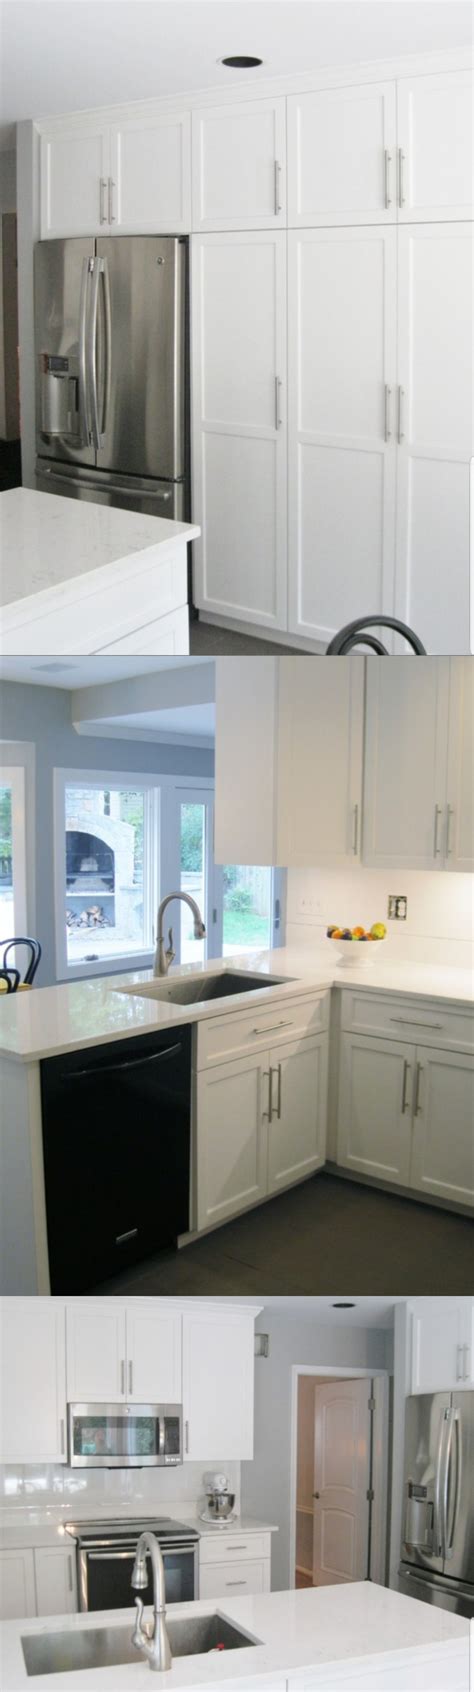 30 Before And After Kitchen Cabinet Refacing Ideas